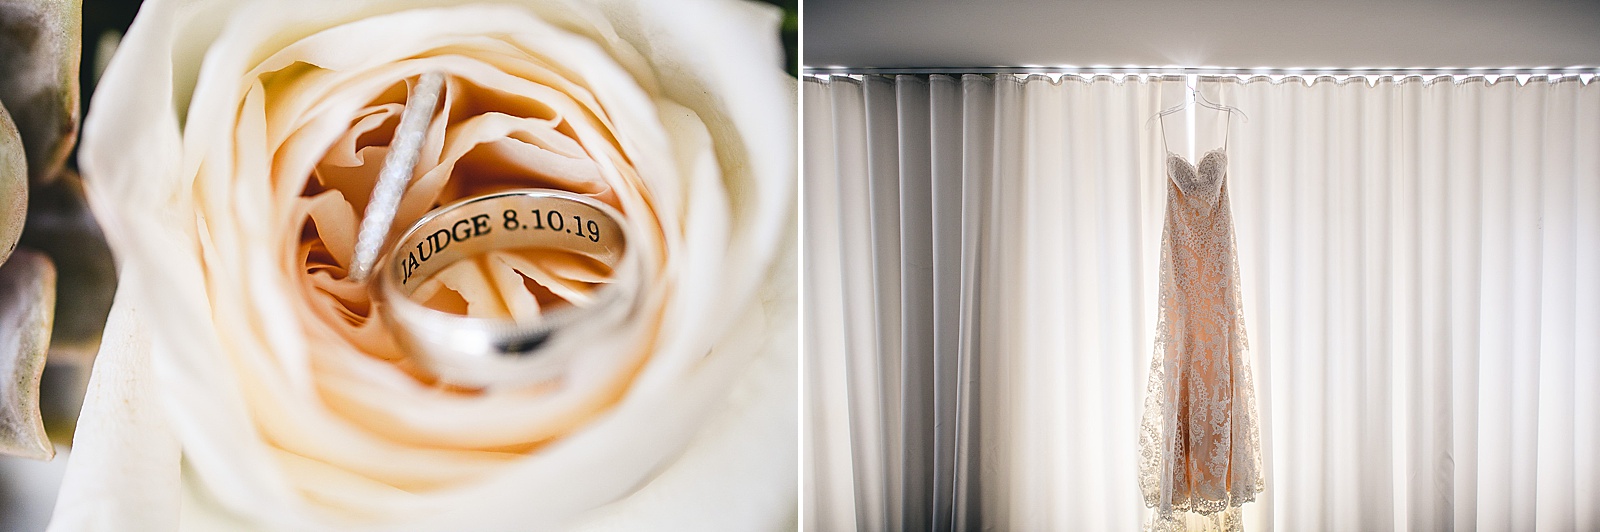 07 rings and dress details - Audrey + Jake's Beautiful Chicago Wedding at Chez